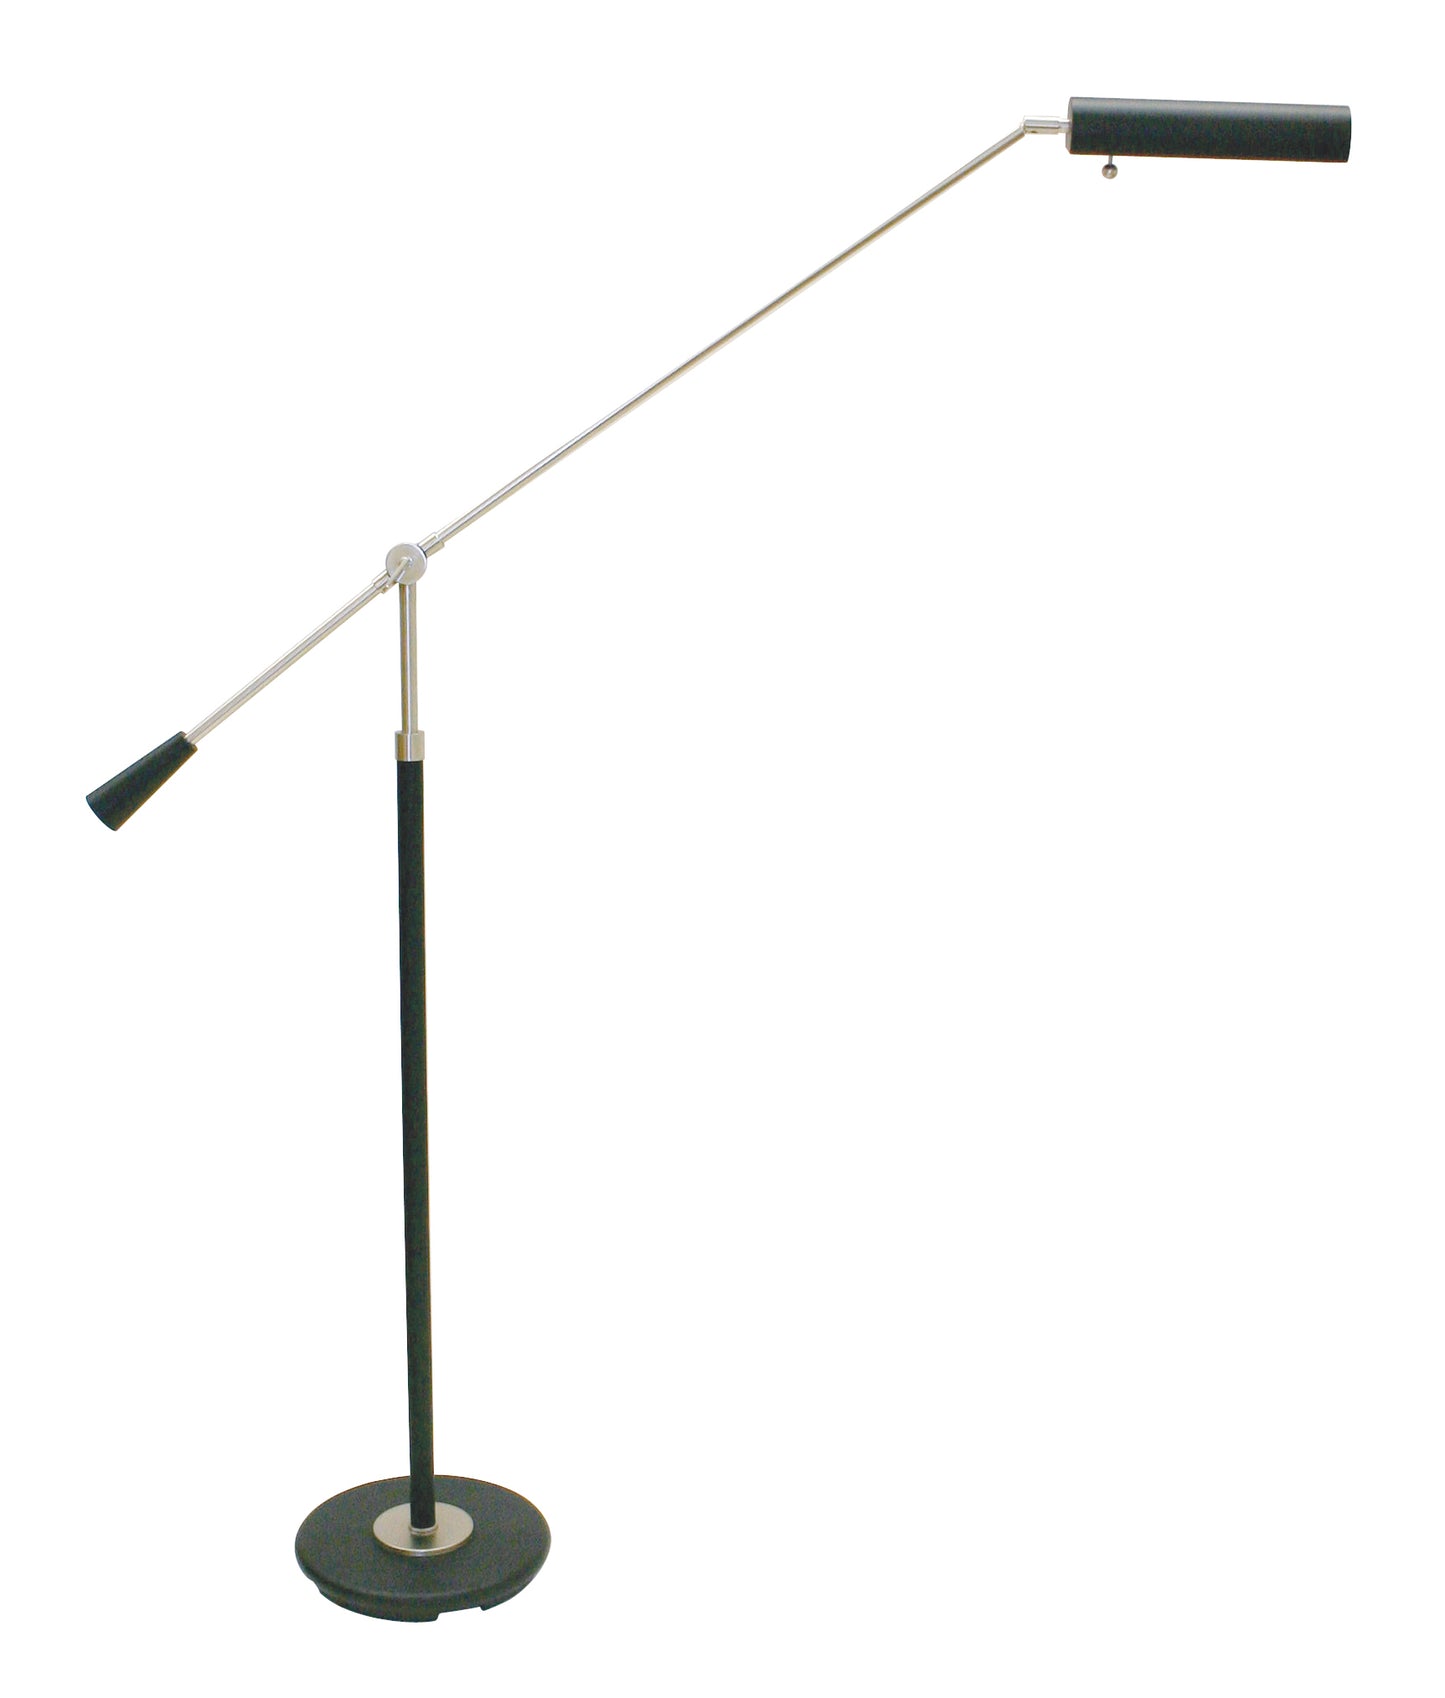 House of Troy Grand Piano Counter Balance Floor Lamp in Black with Satin Nickel Accents PFL-527